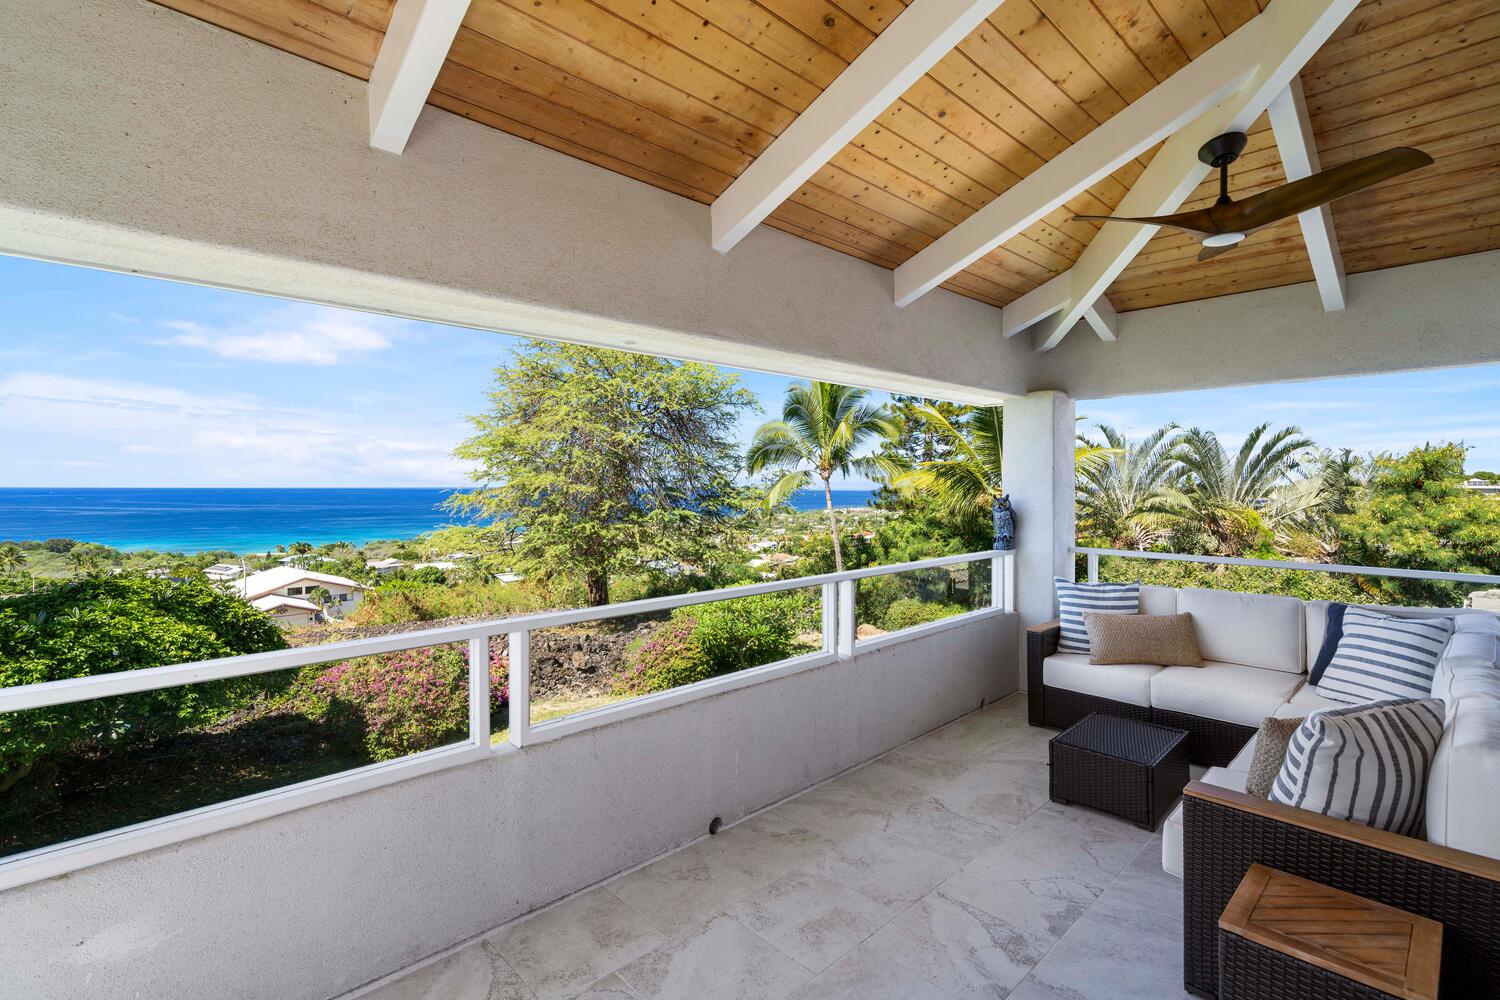 Kailua Kona Vacation Rentals, Ho'okipa Hale - Drink in sweeping vistas from the seclusion of the primary suite's private deck.